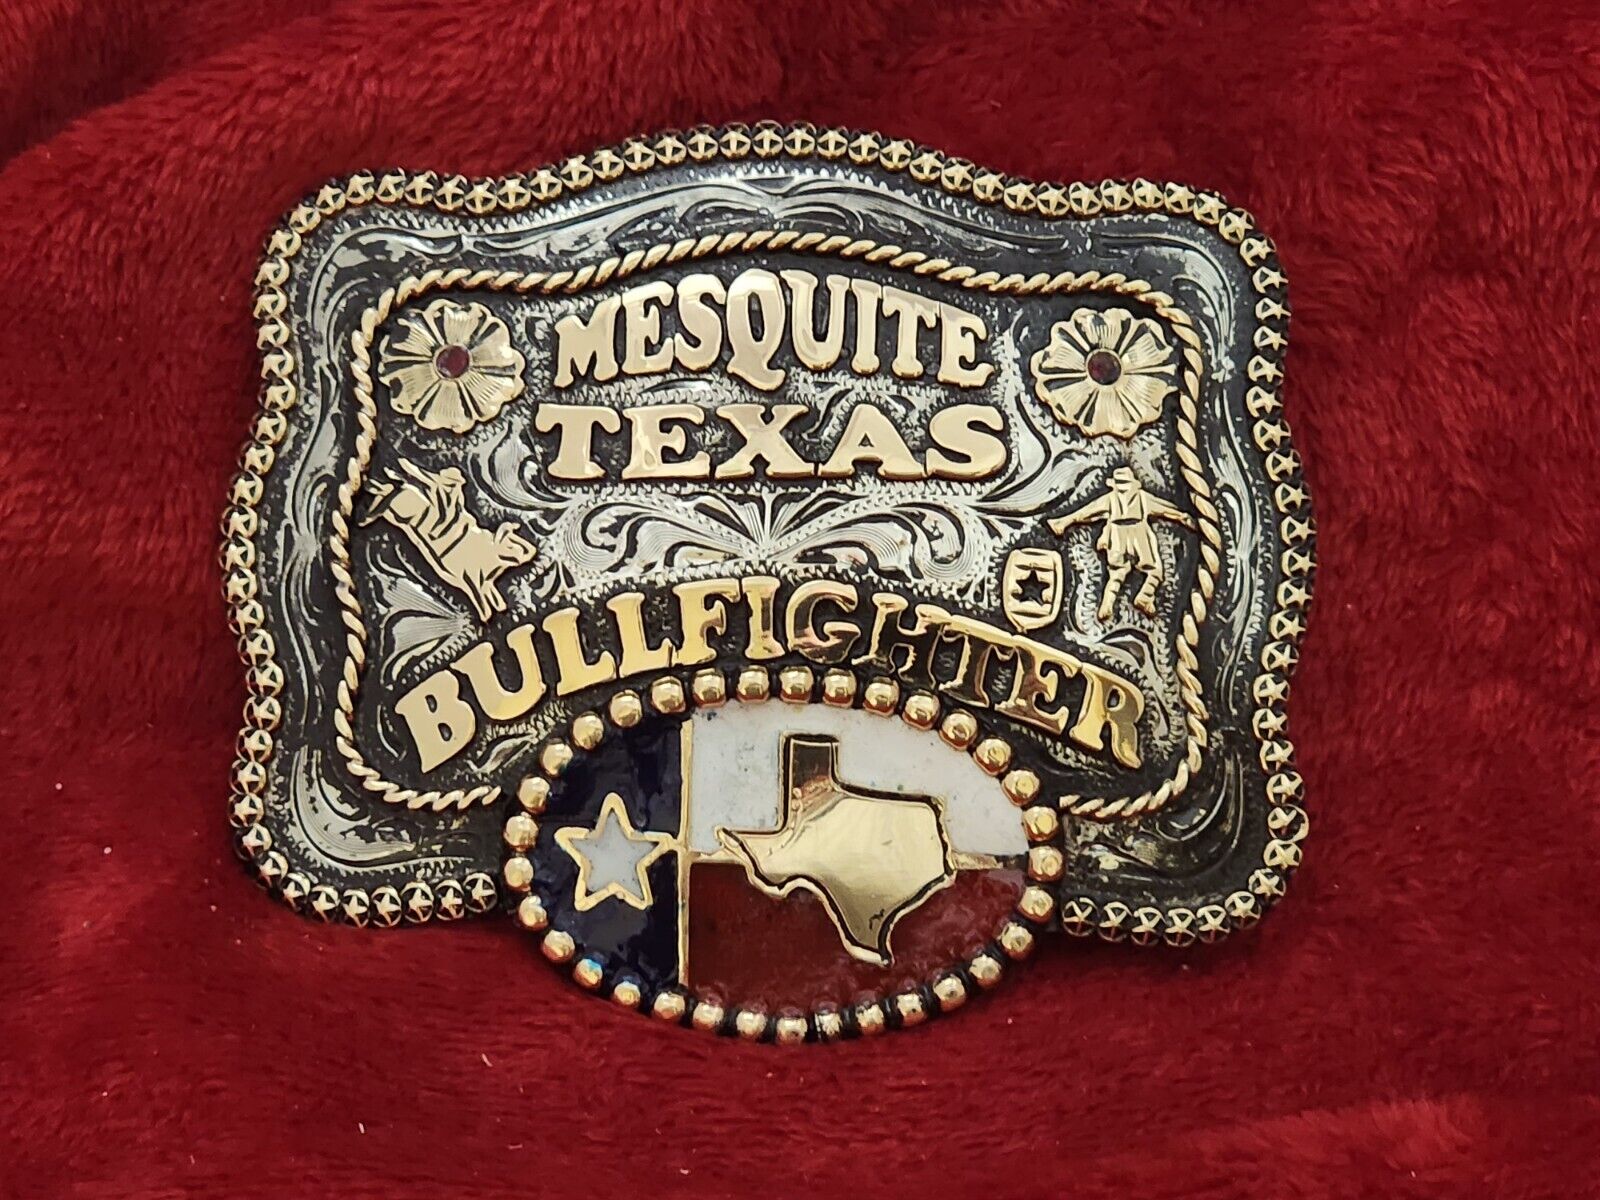 CHAMPION TROPHY RODEO BELT BUCKLE☆MESQUITE TEXAS PROFESSION BULLFIGHTER☆RARE☆45